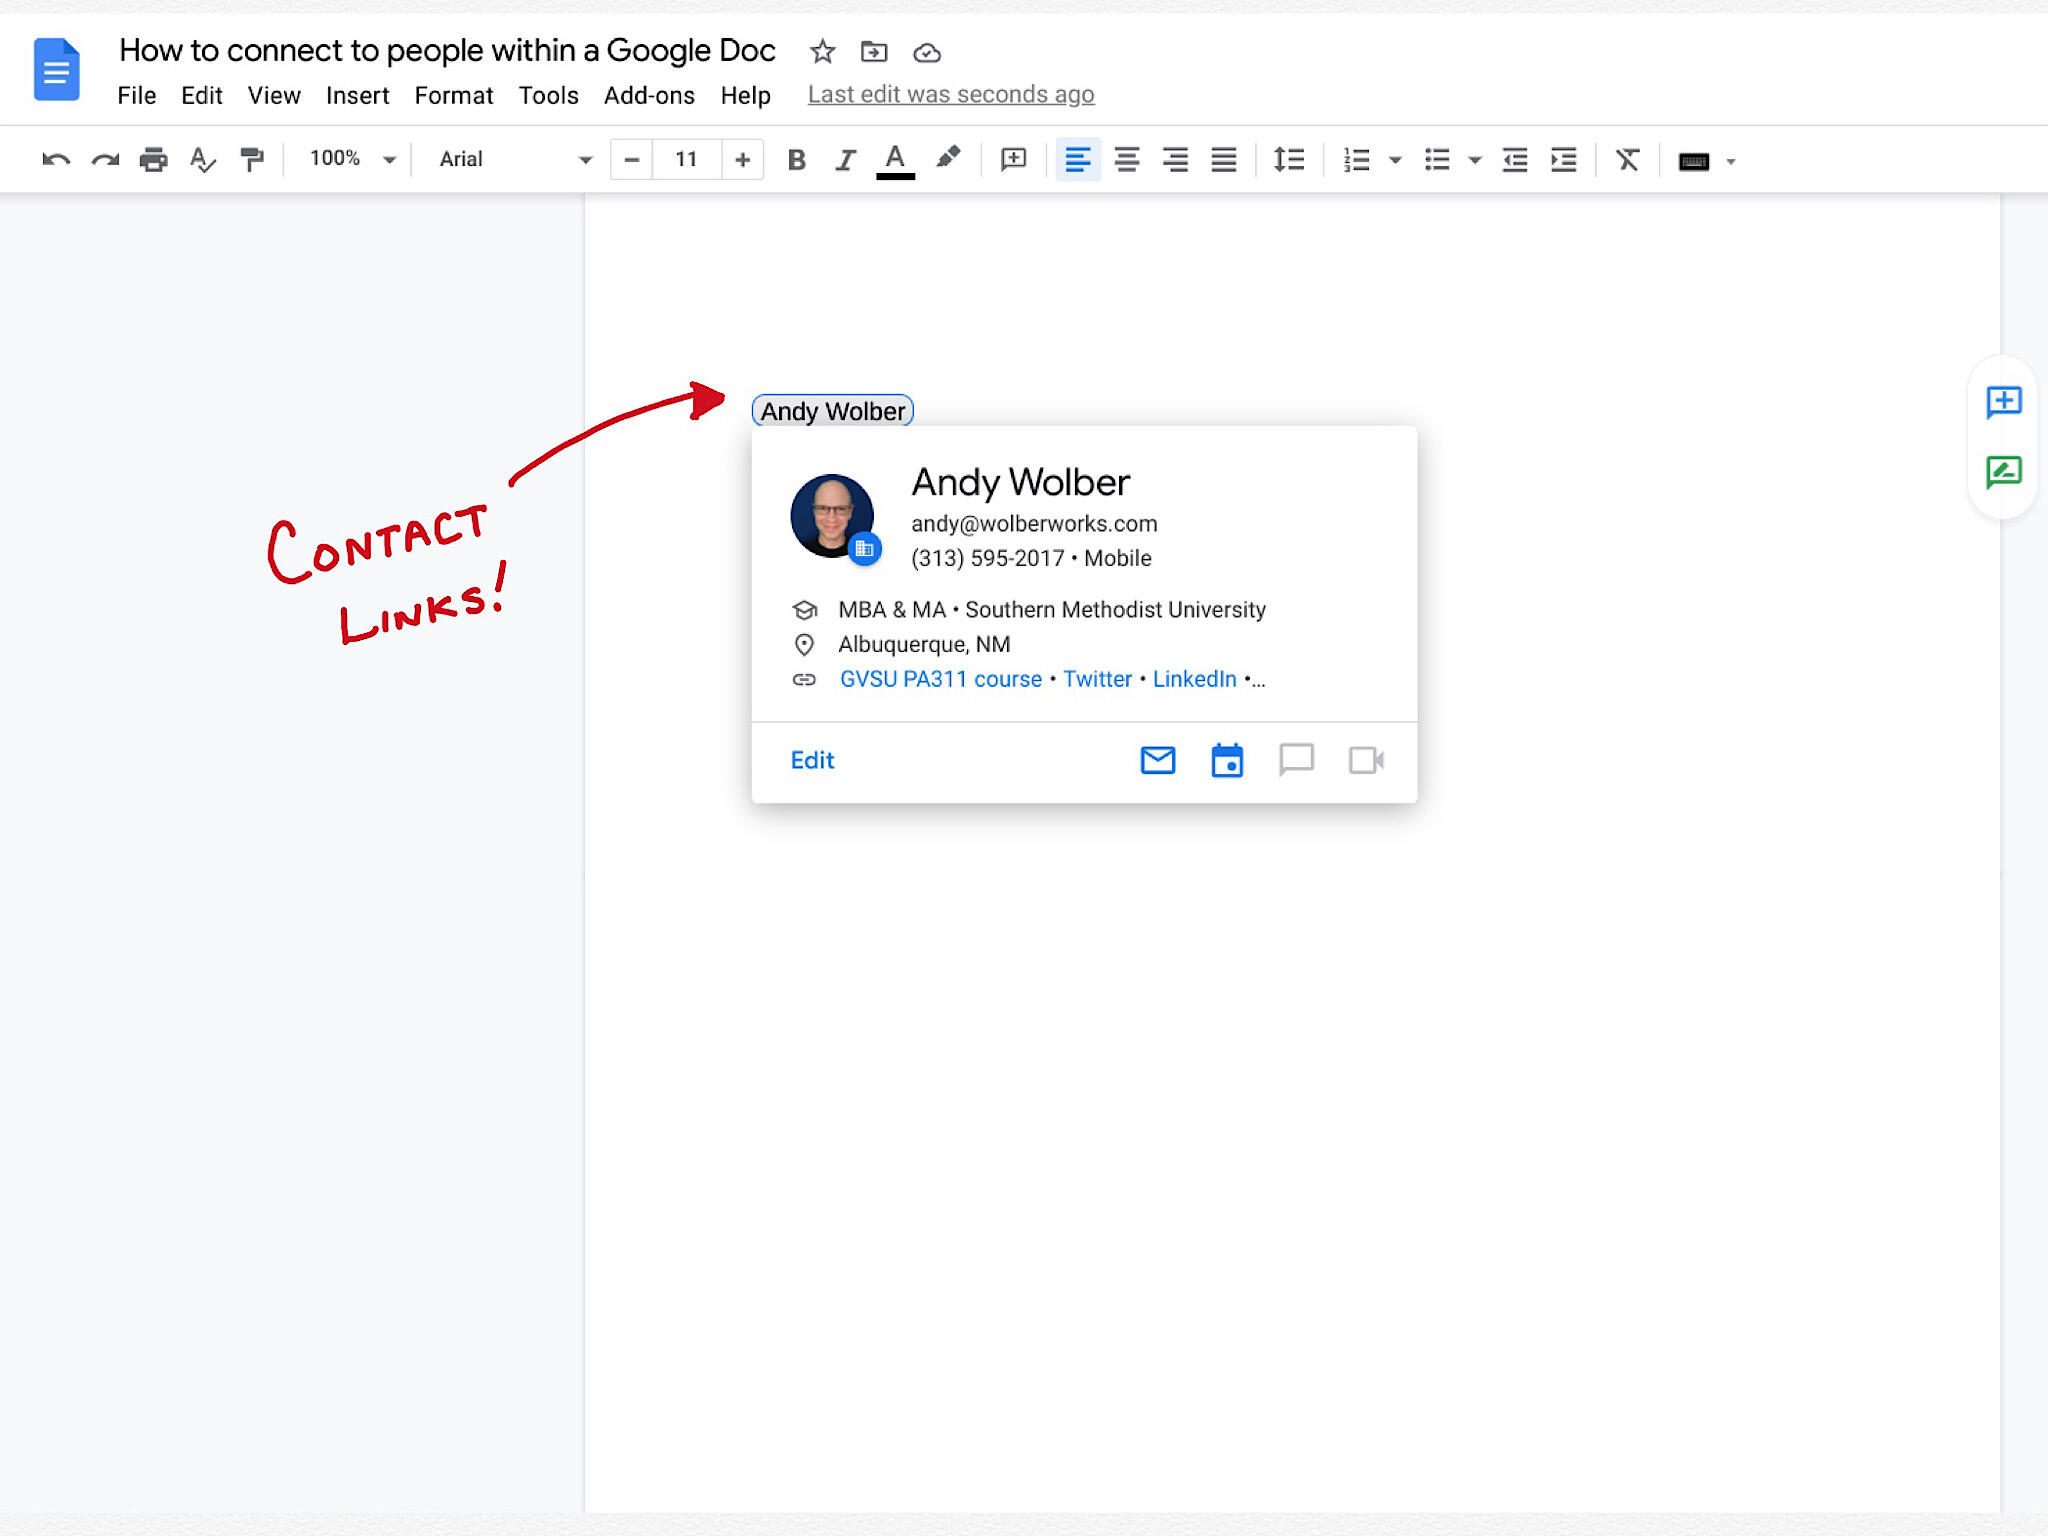 Screenshot of author's name in a Google Doc on the web, displays email, phone, education, location, and email and calendar icons. Words "Contact Links!" handwritten and point to the name in the text that is the source of the @ mentioned contact.